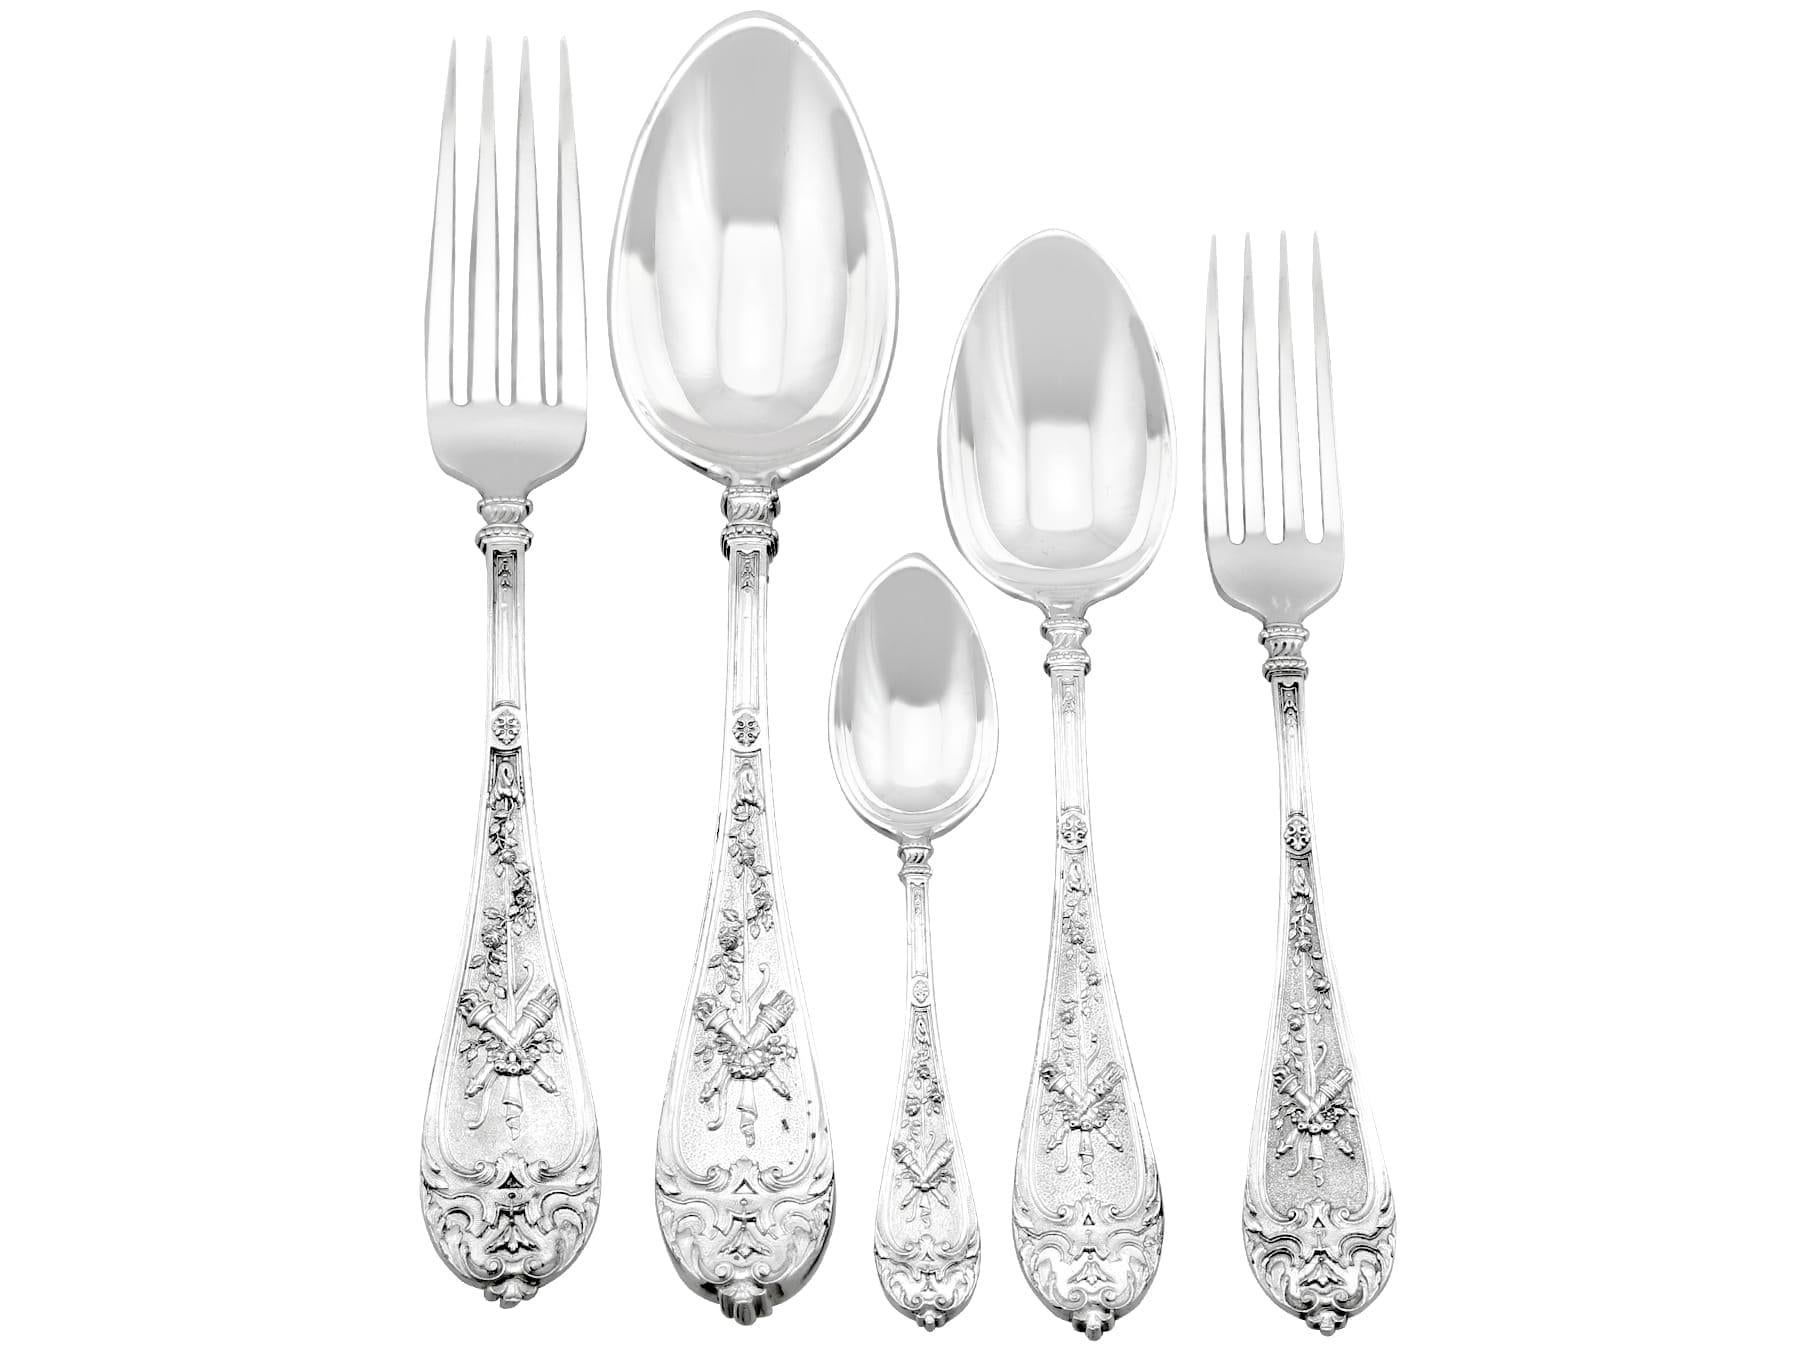 An exceptional, fine and impressive antique Victorian sterling silver flatware service for twelve persons; an addition to our diverse silver cutlery collection.

The pieces of this exceptional antique Victorian sterling silver flatware service for